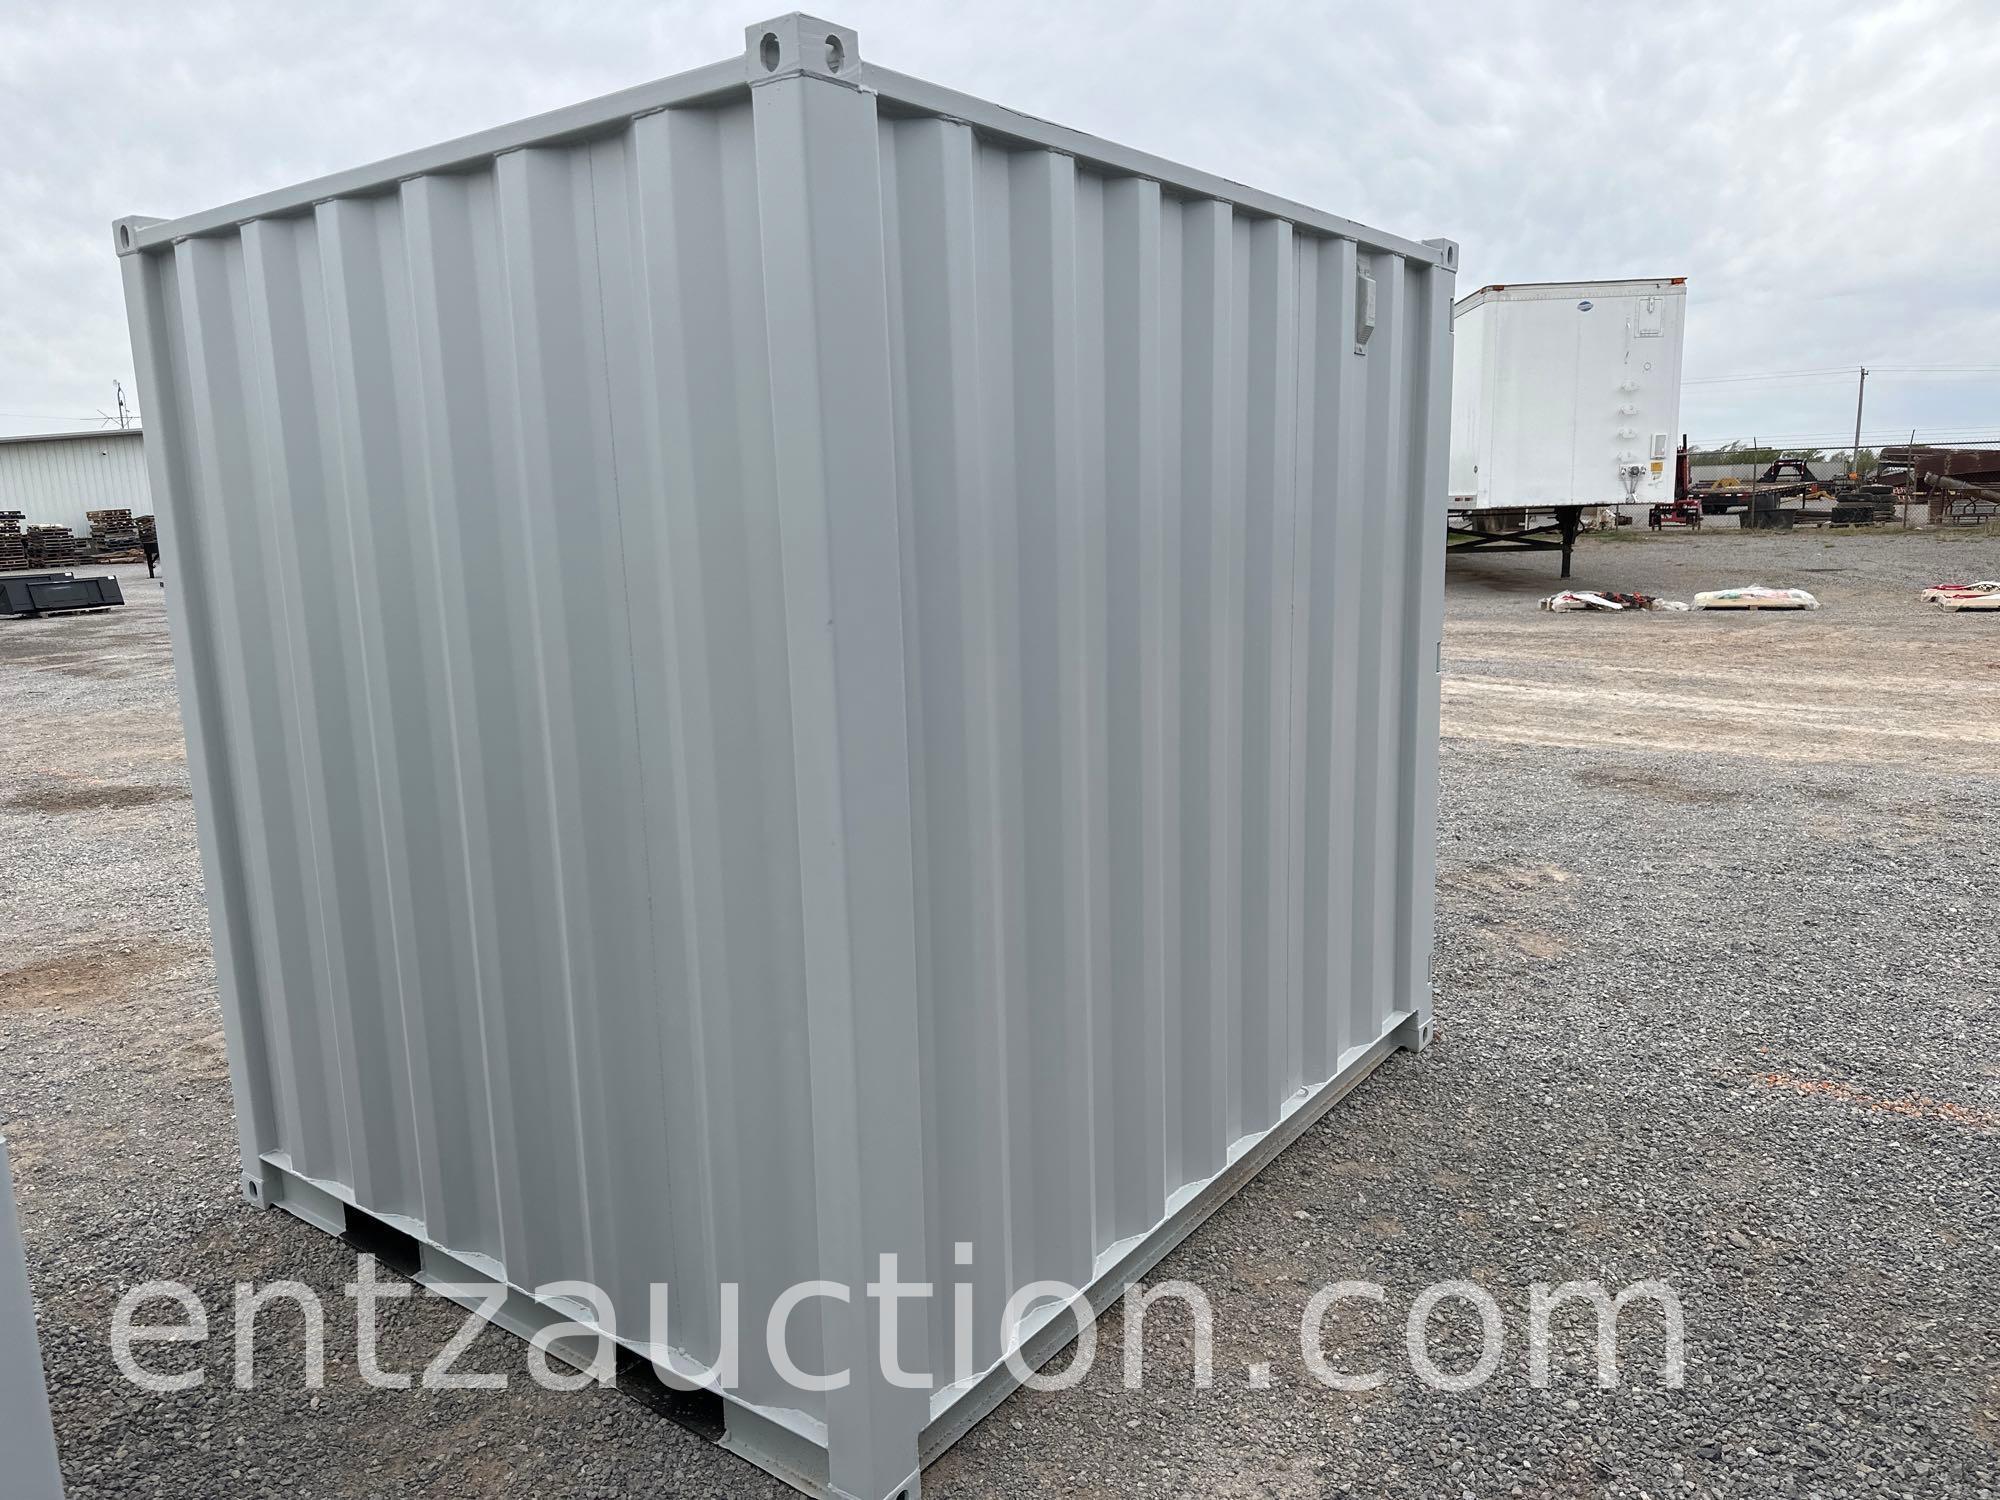 80" X 98" X 88" SHIPPING CONTAINER,